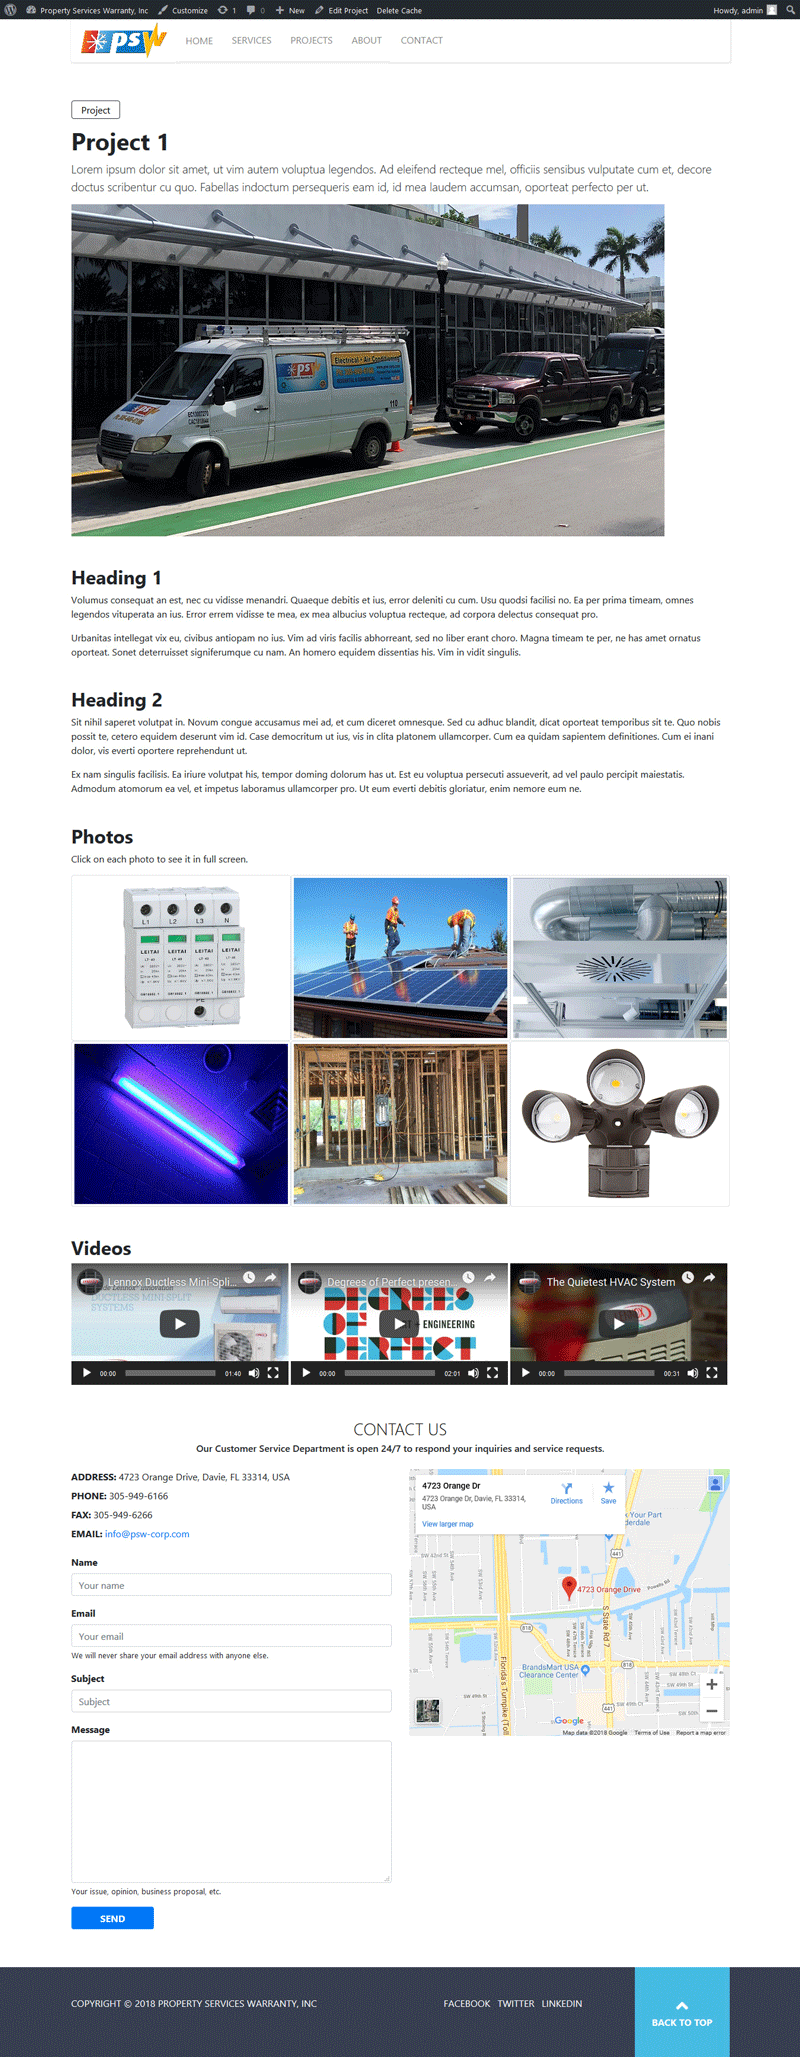 Website "PSW Corporation": A single project viewed on large-screen devices.